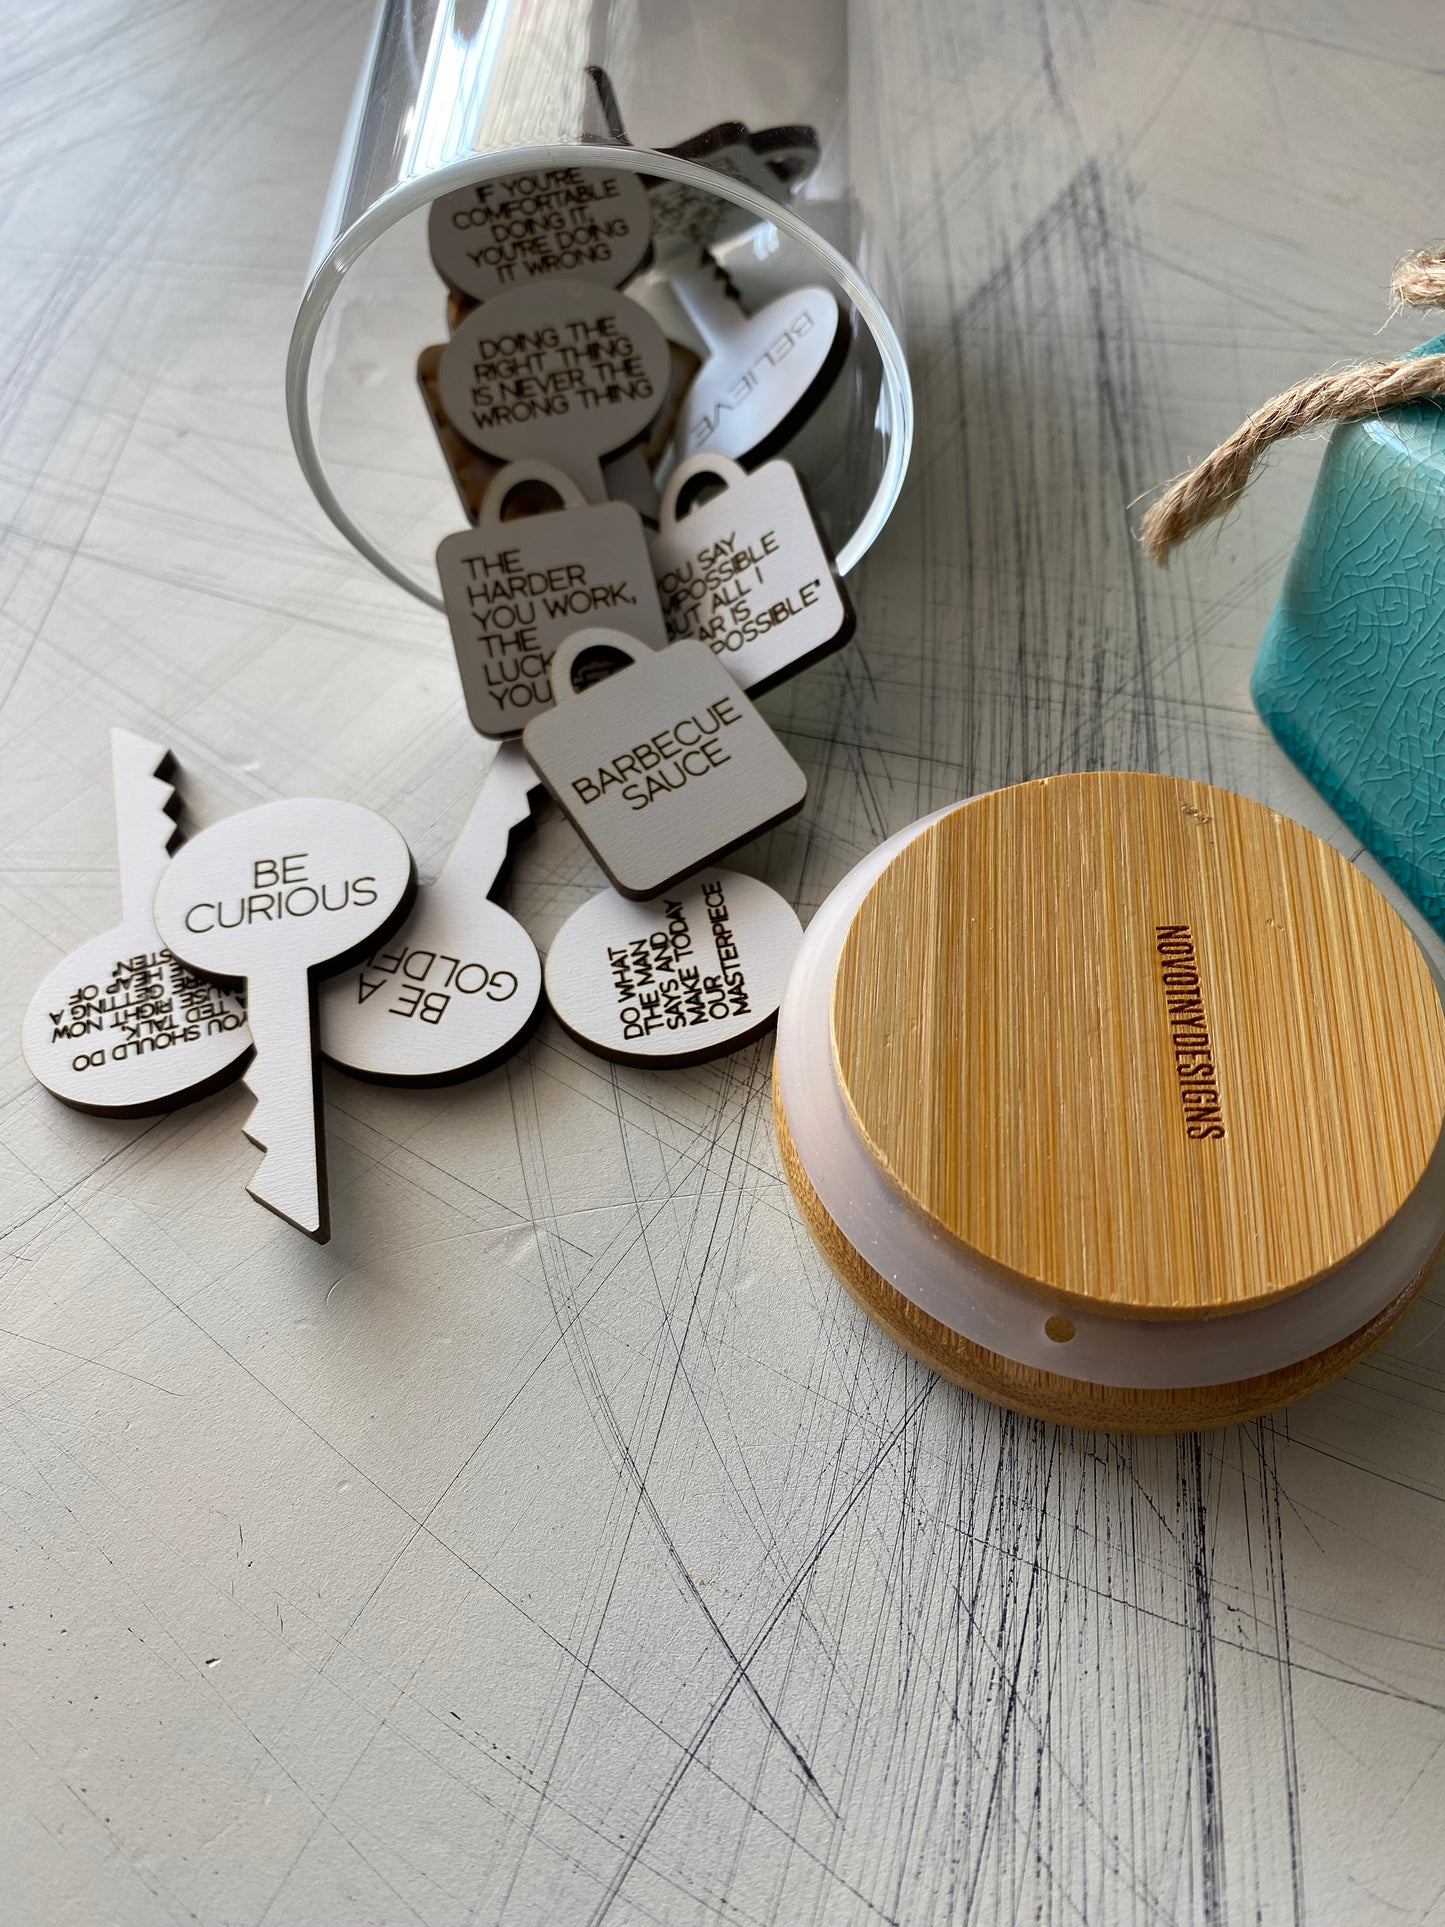 Ted lock and key quote tokens - engraved wood tokens with jar